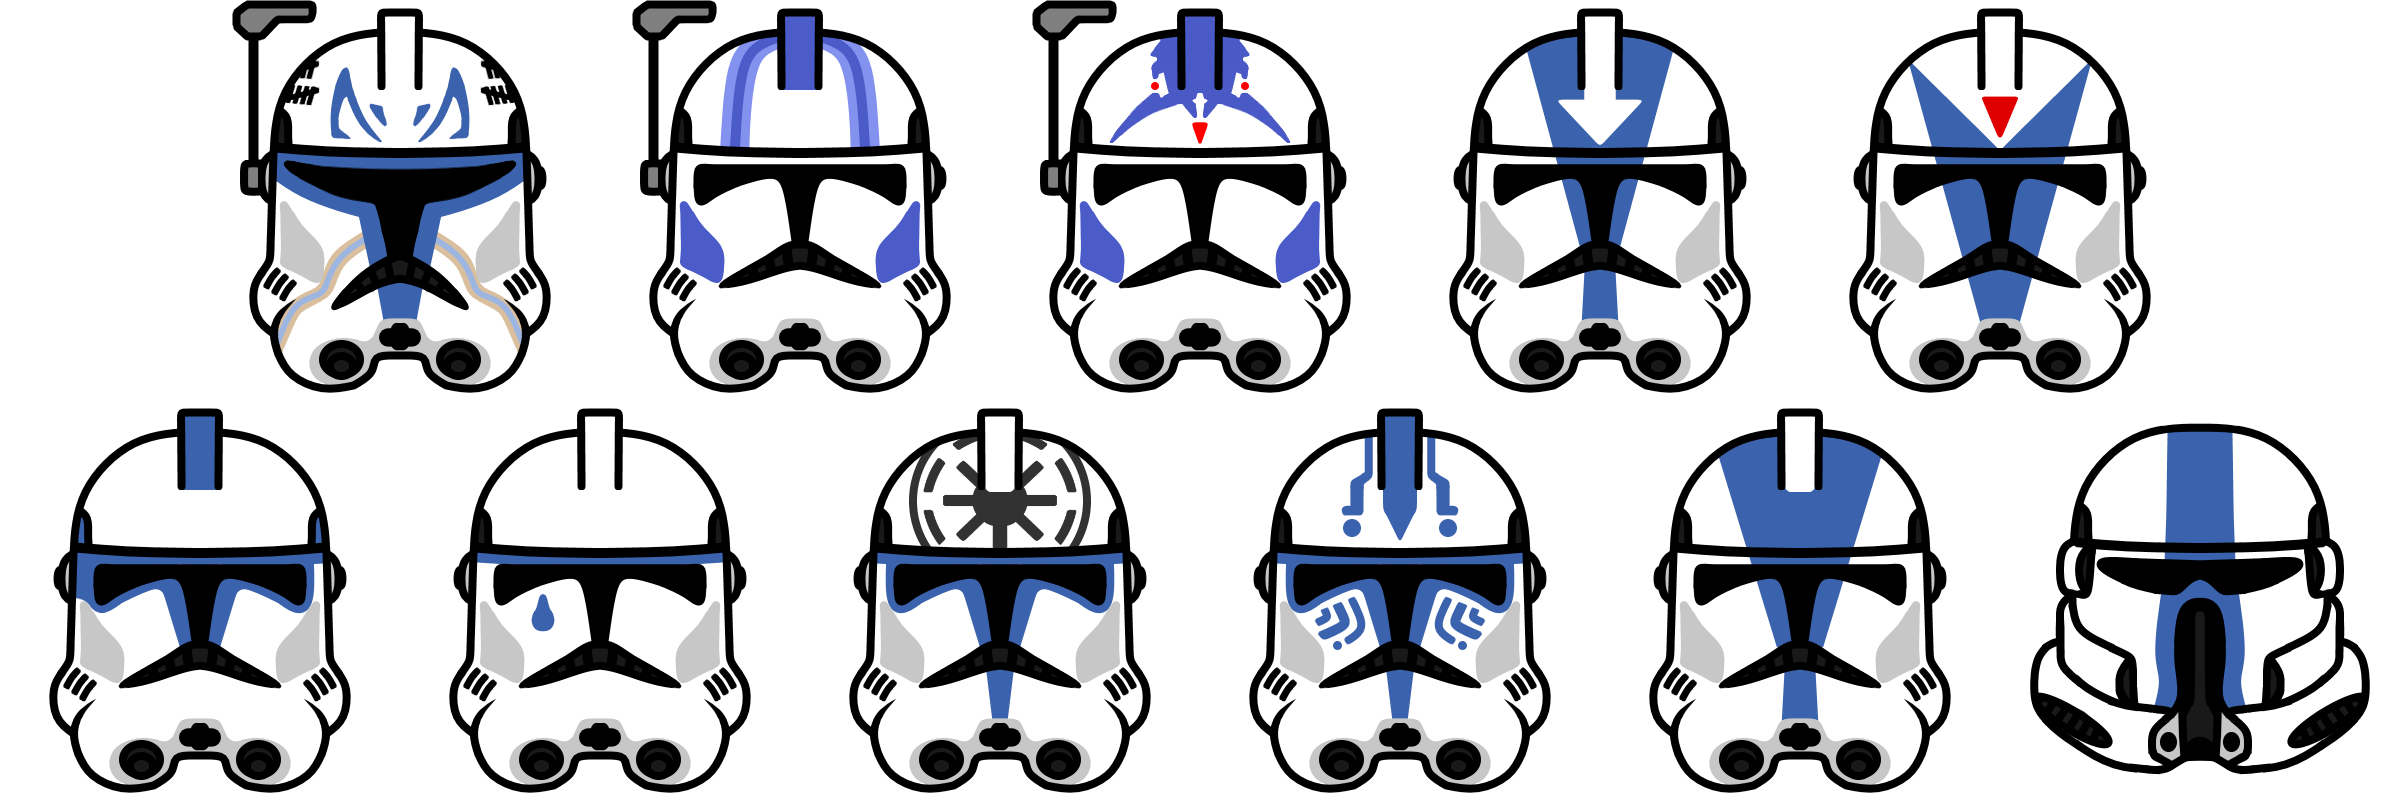 501st_legion_by_what_the_frog-d96ubuq.png